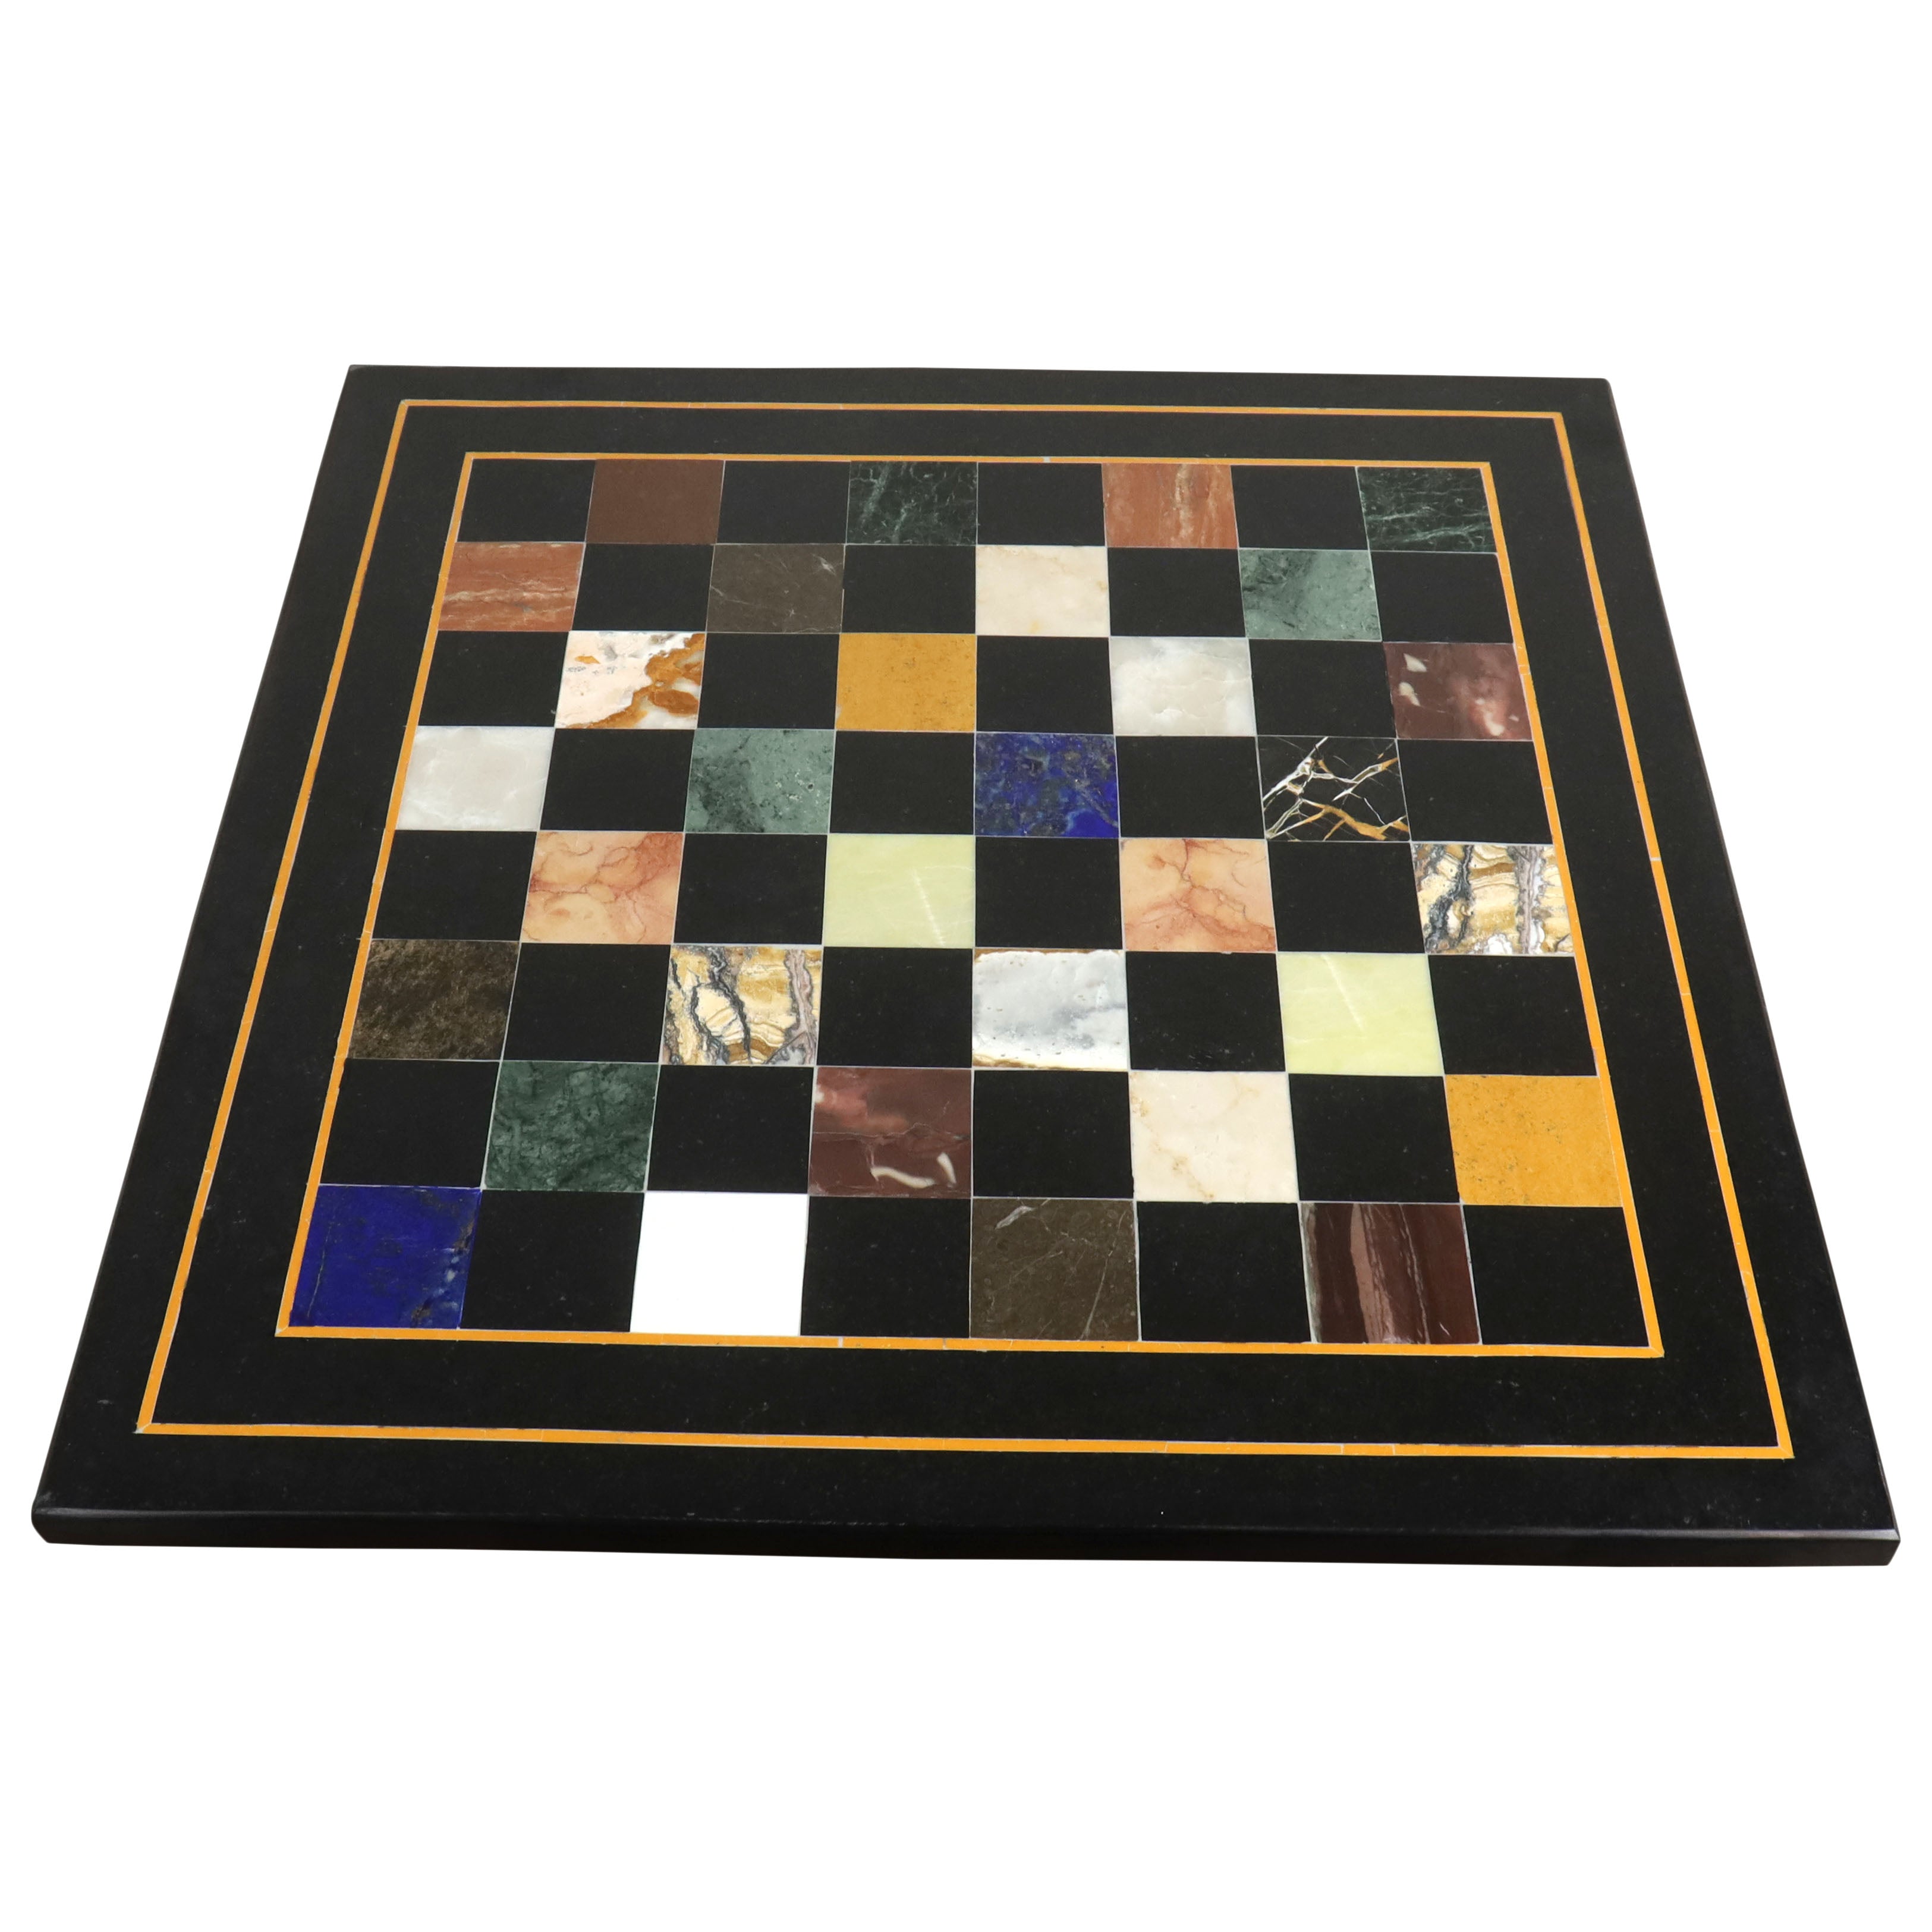 Wooden Chess Board I Buy Now Here I Mother of Pearl Inlays